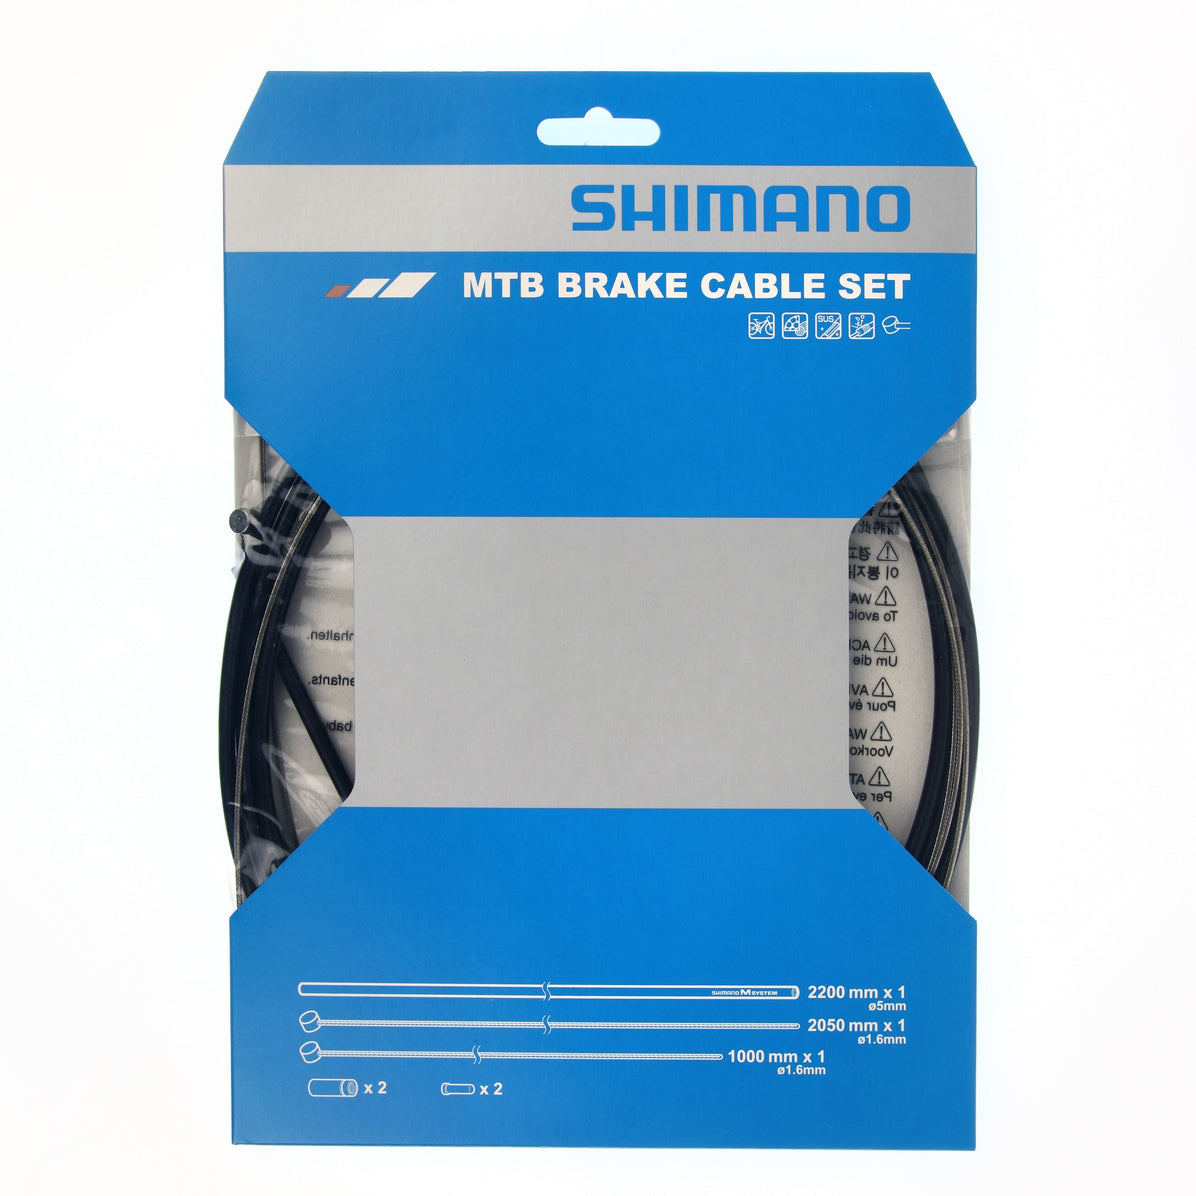 Shimano MTB Brake Cable Set with Stainless Steel Inner